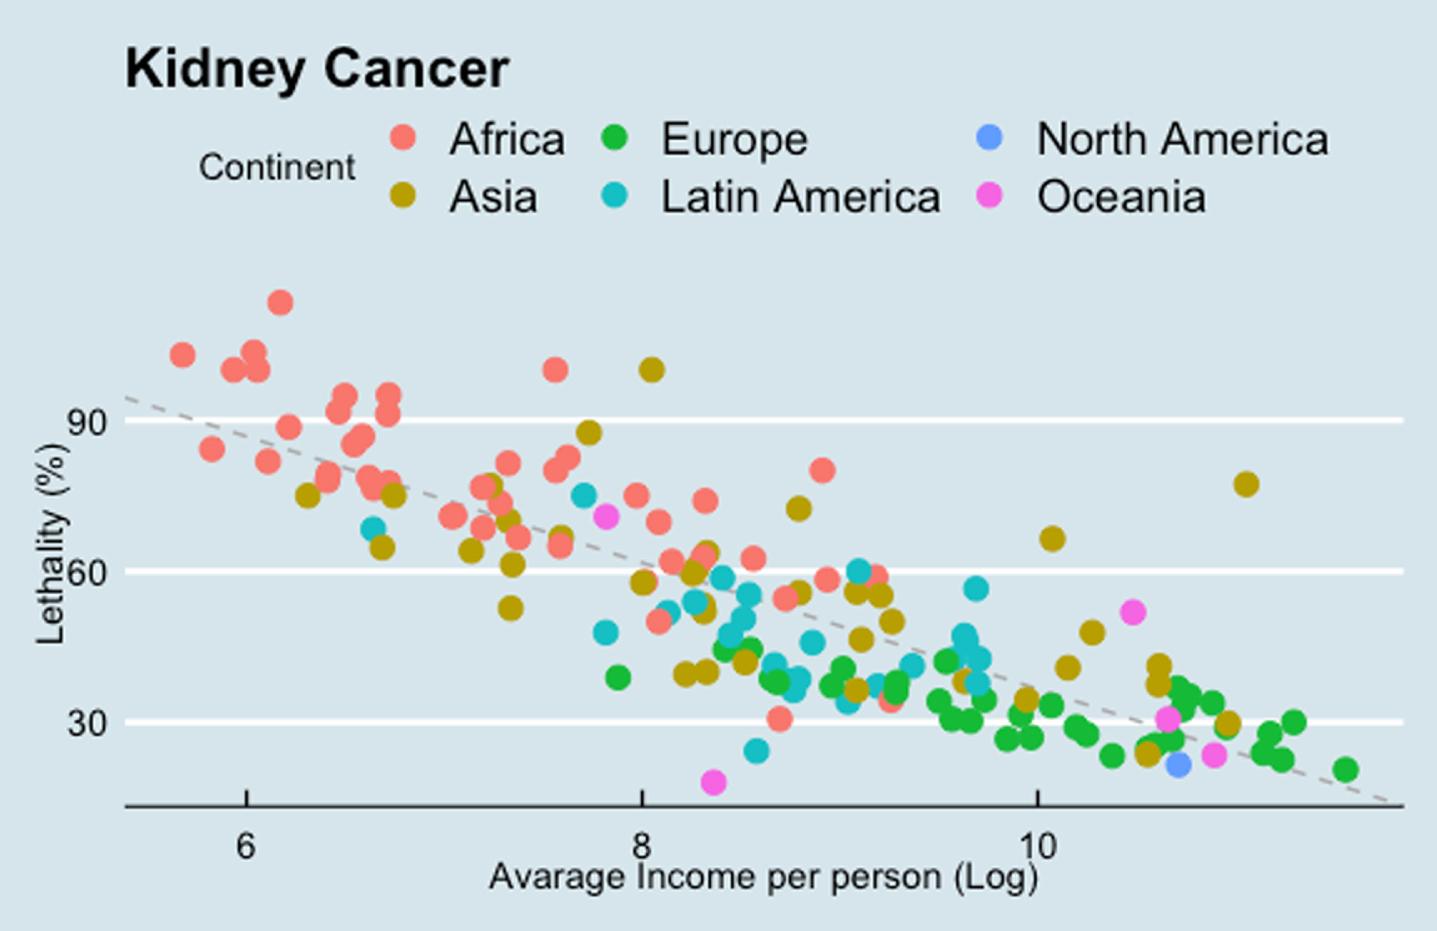 Results of kidney cancer lethality (MIR) and income (GDP per capita). Each point indicates one single country. The gray bar indicates the correlation between these two variables.